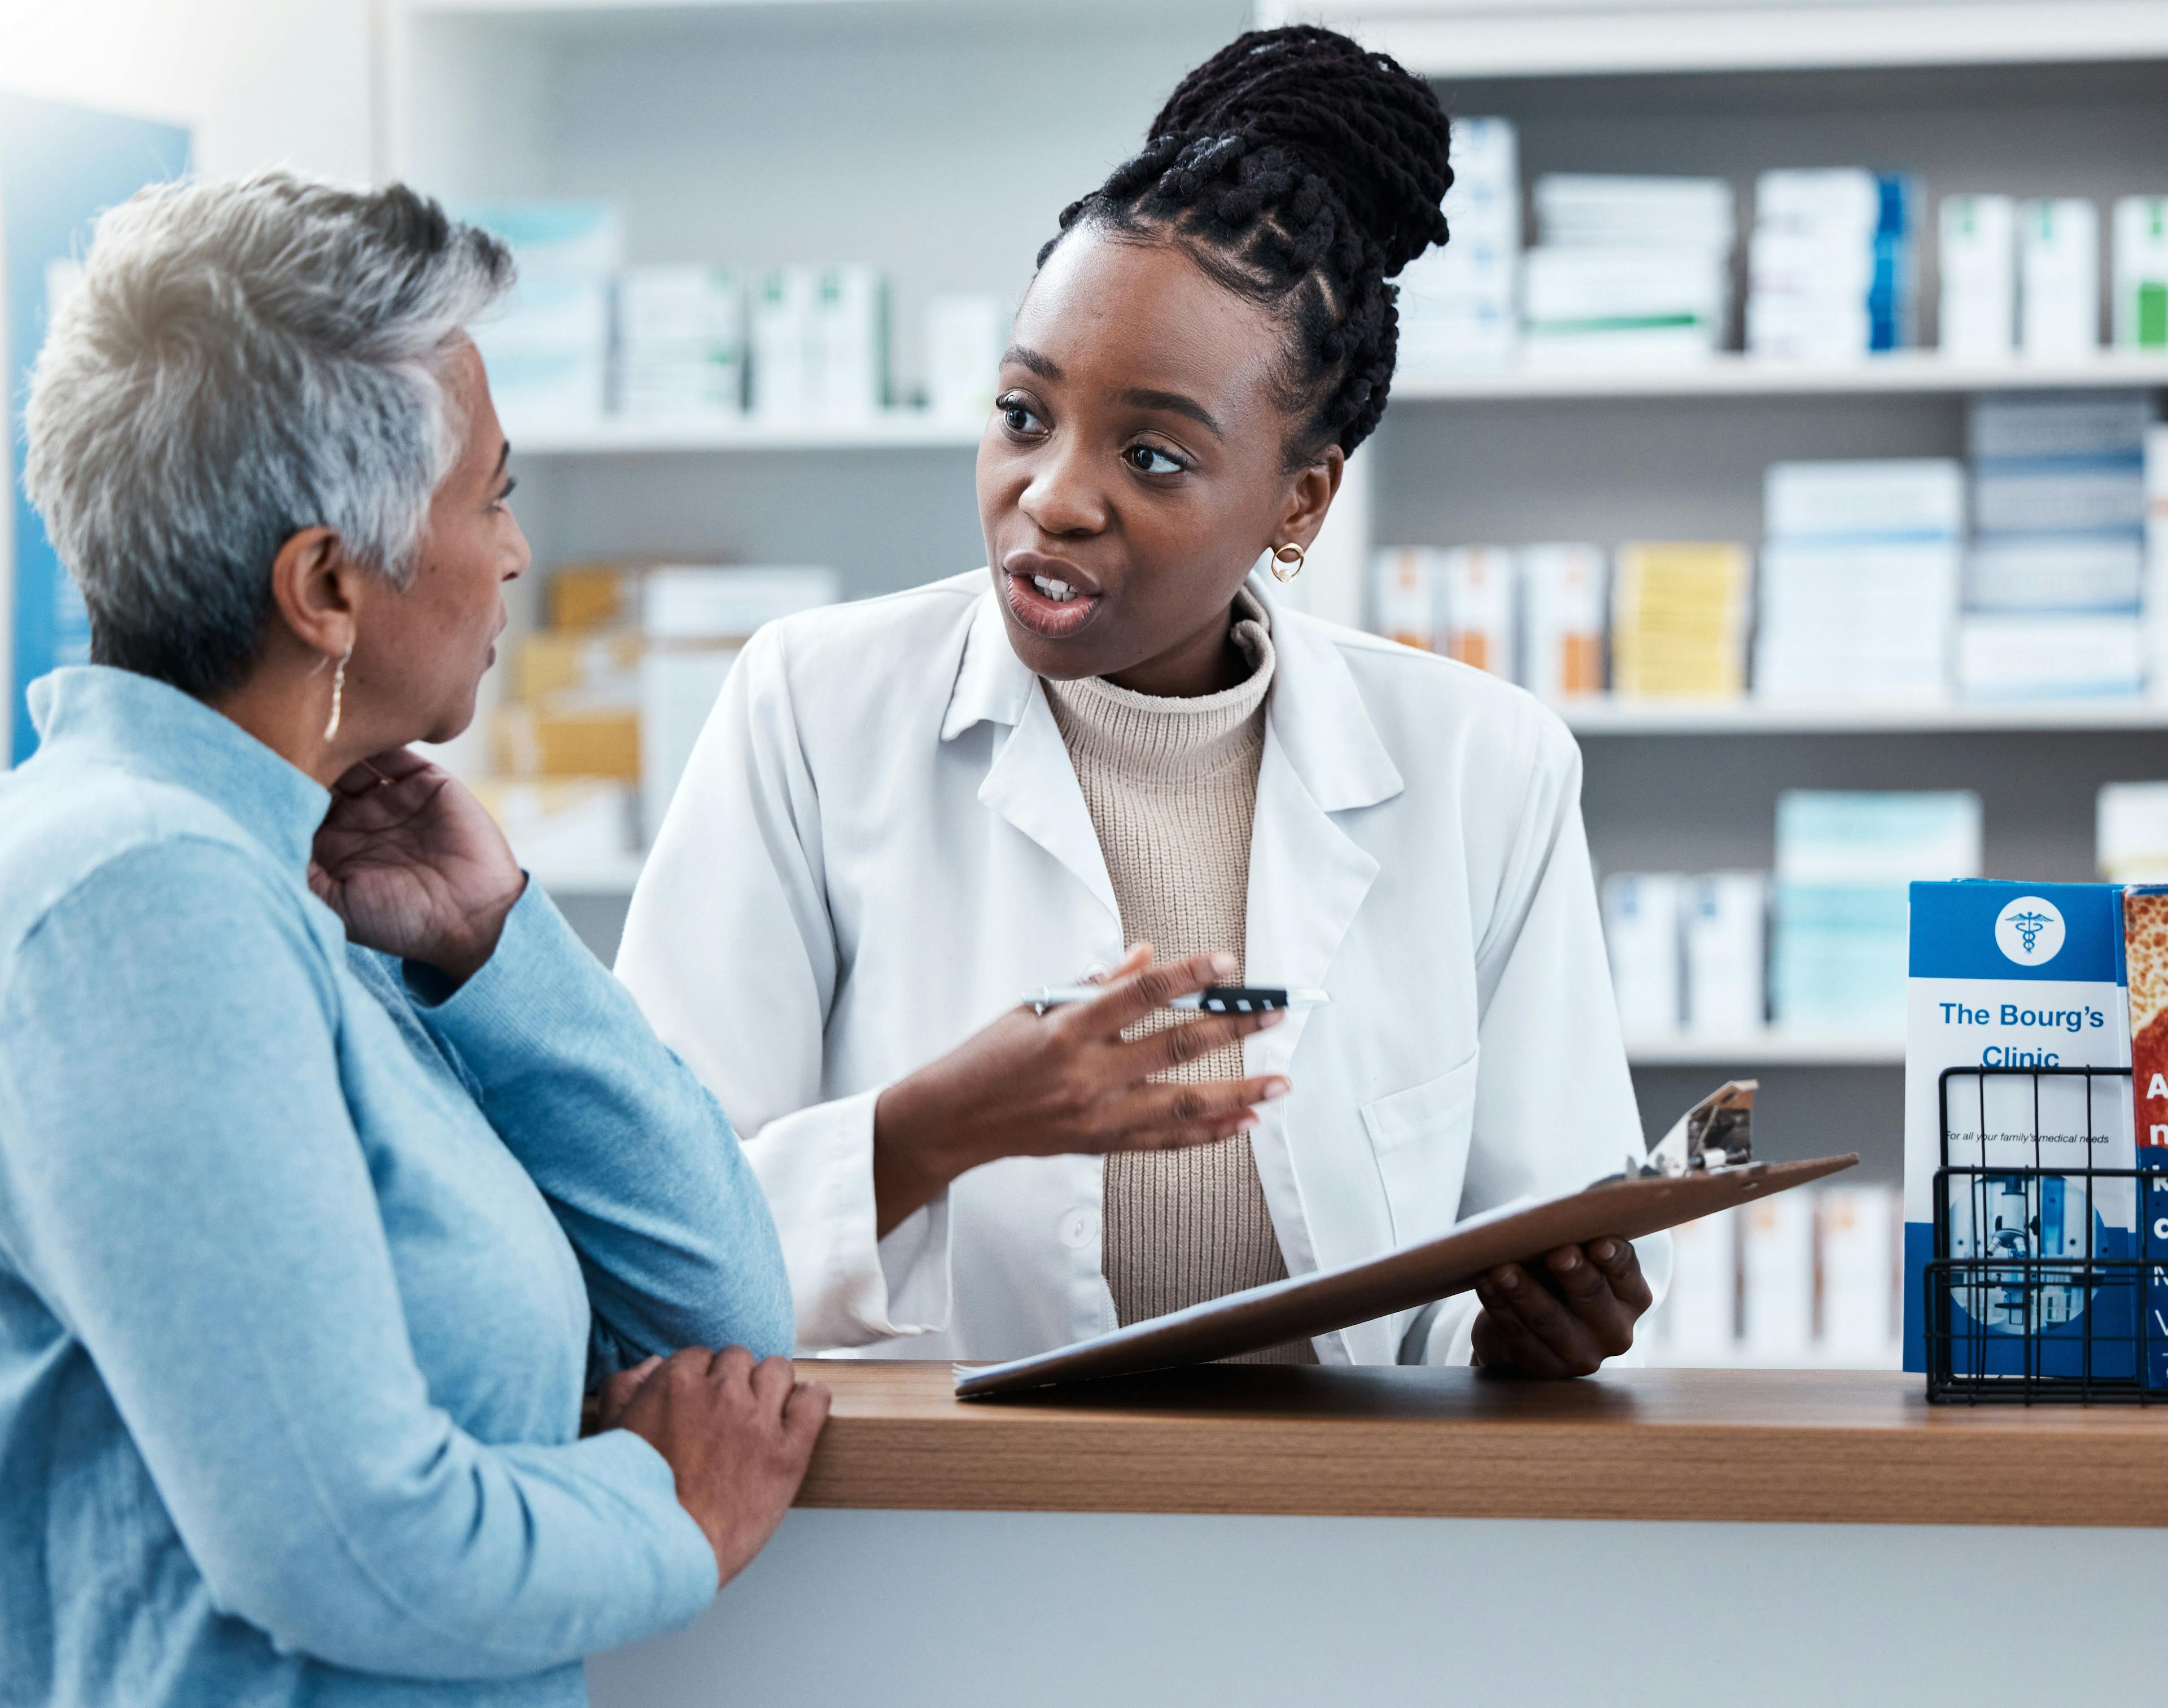 Healthcare, clipboard and trust with a female medicine professional helping a patient in a drugstore | Image Credit: Malik E/peopleimages.com - stock.adobe.com